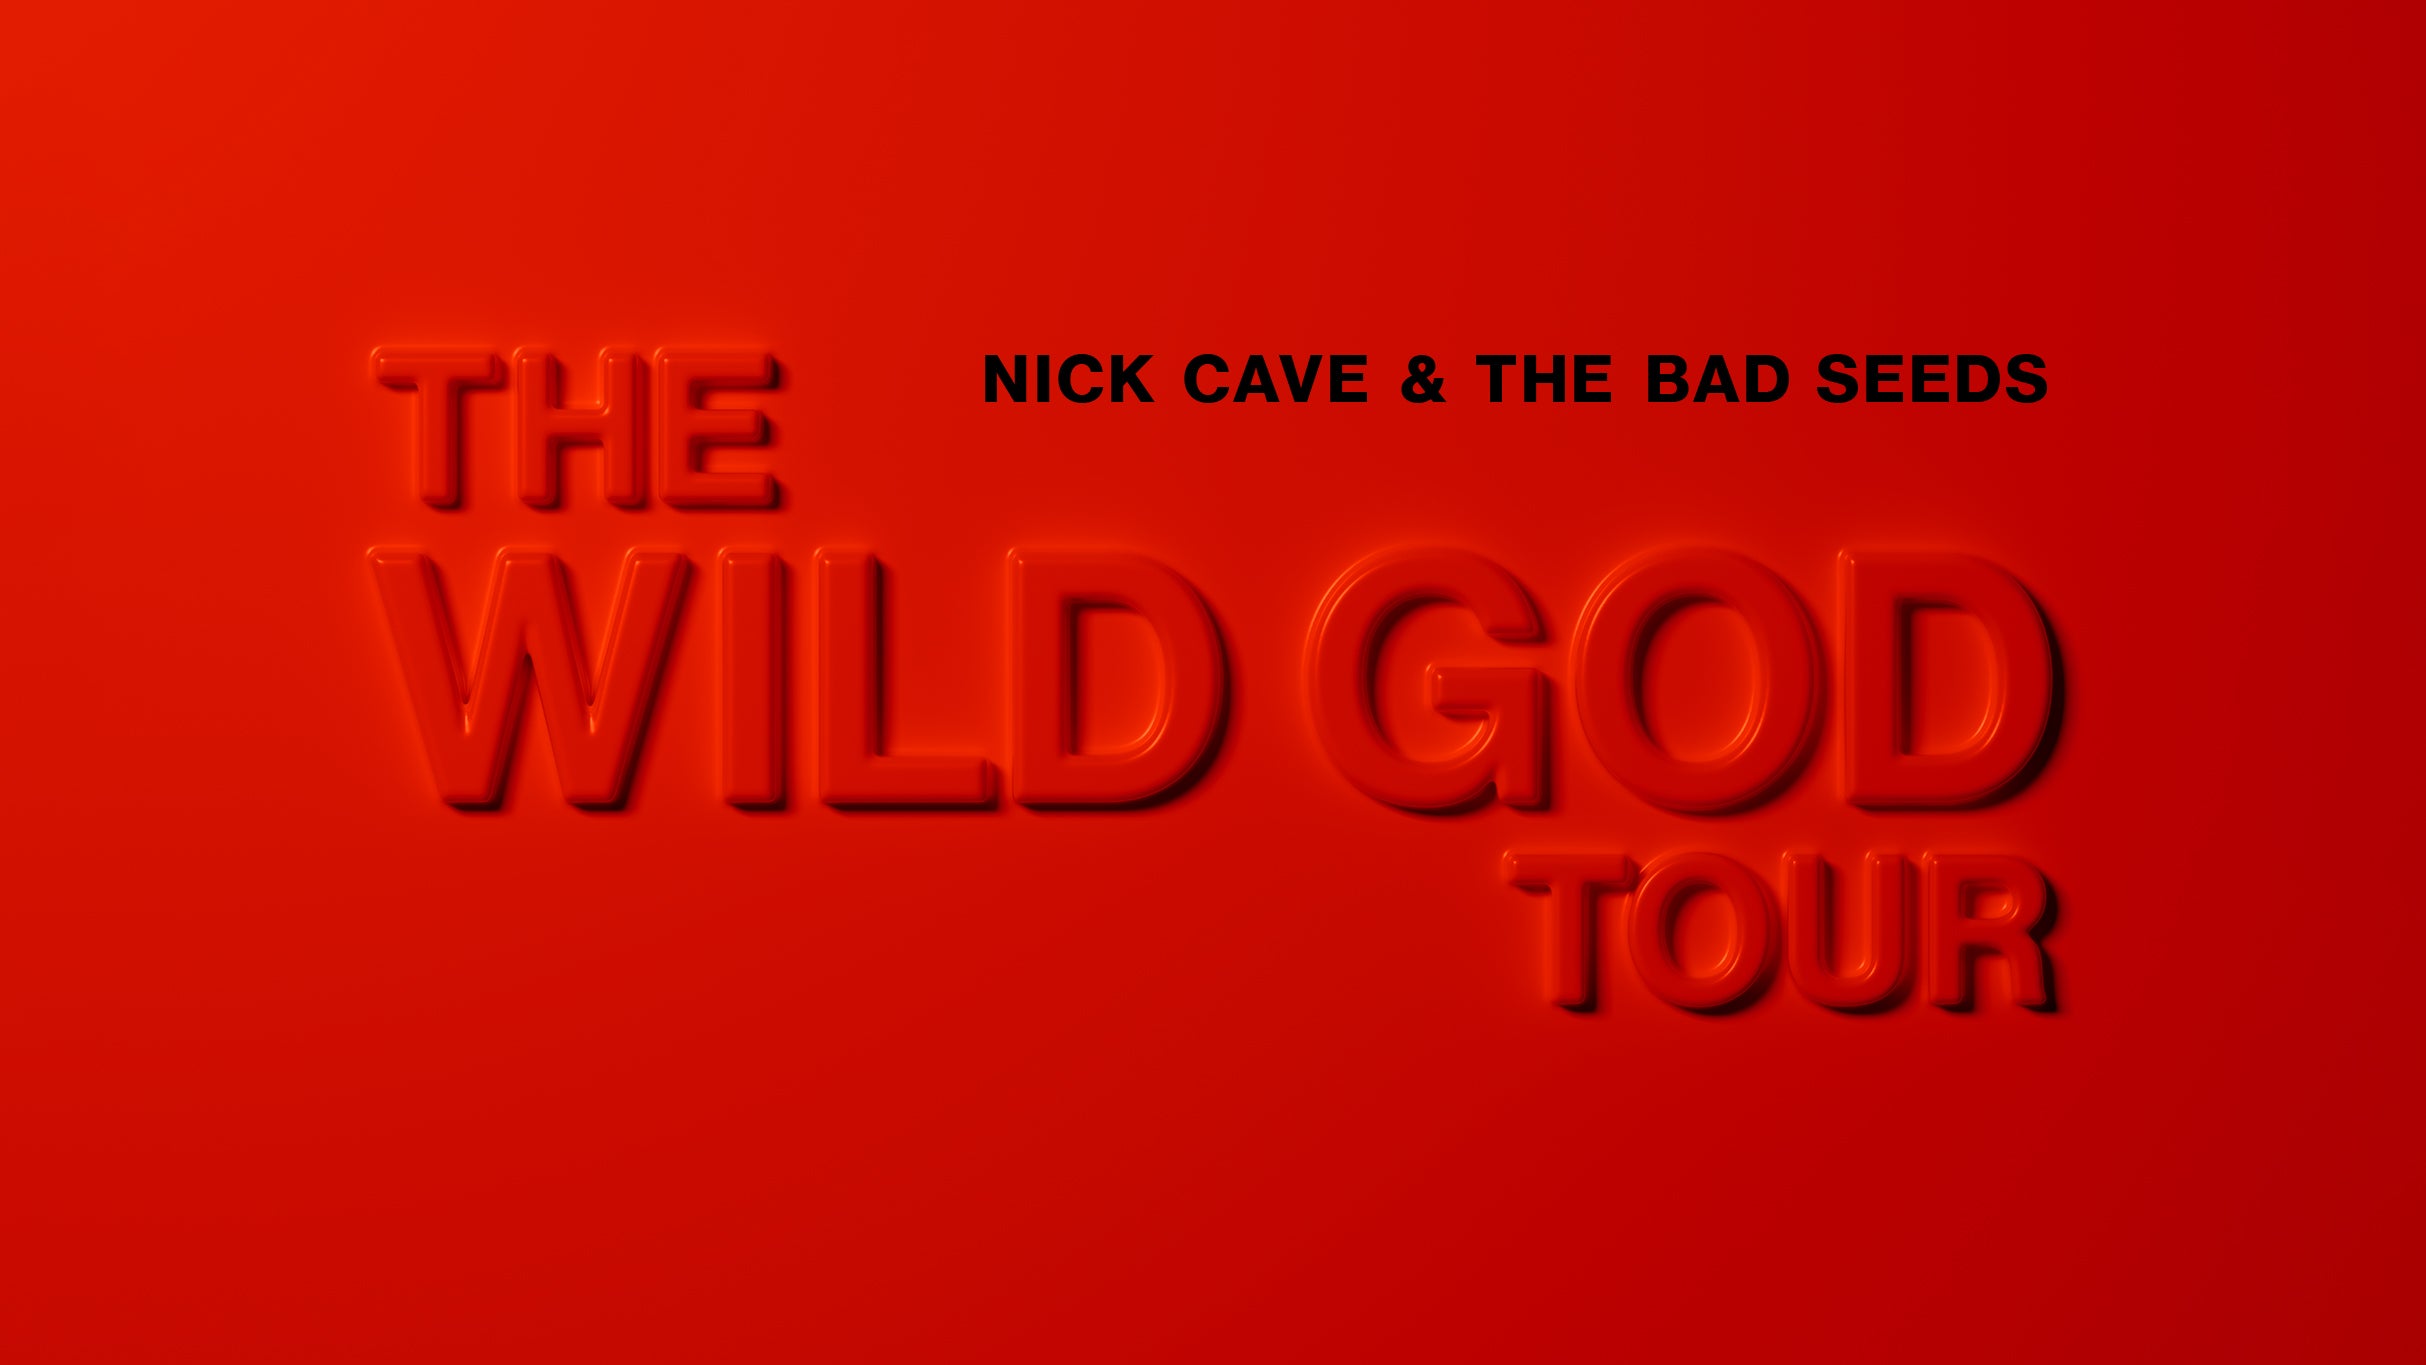 Nick Cave & the Bad Seeds : The Wild God Tour in Dublin promo photo for Spotify presale offer code